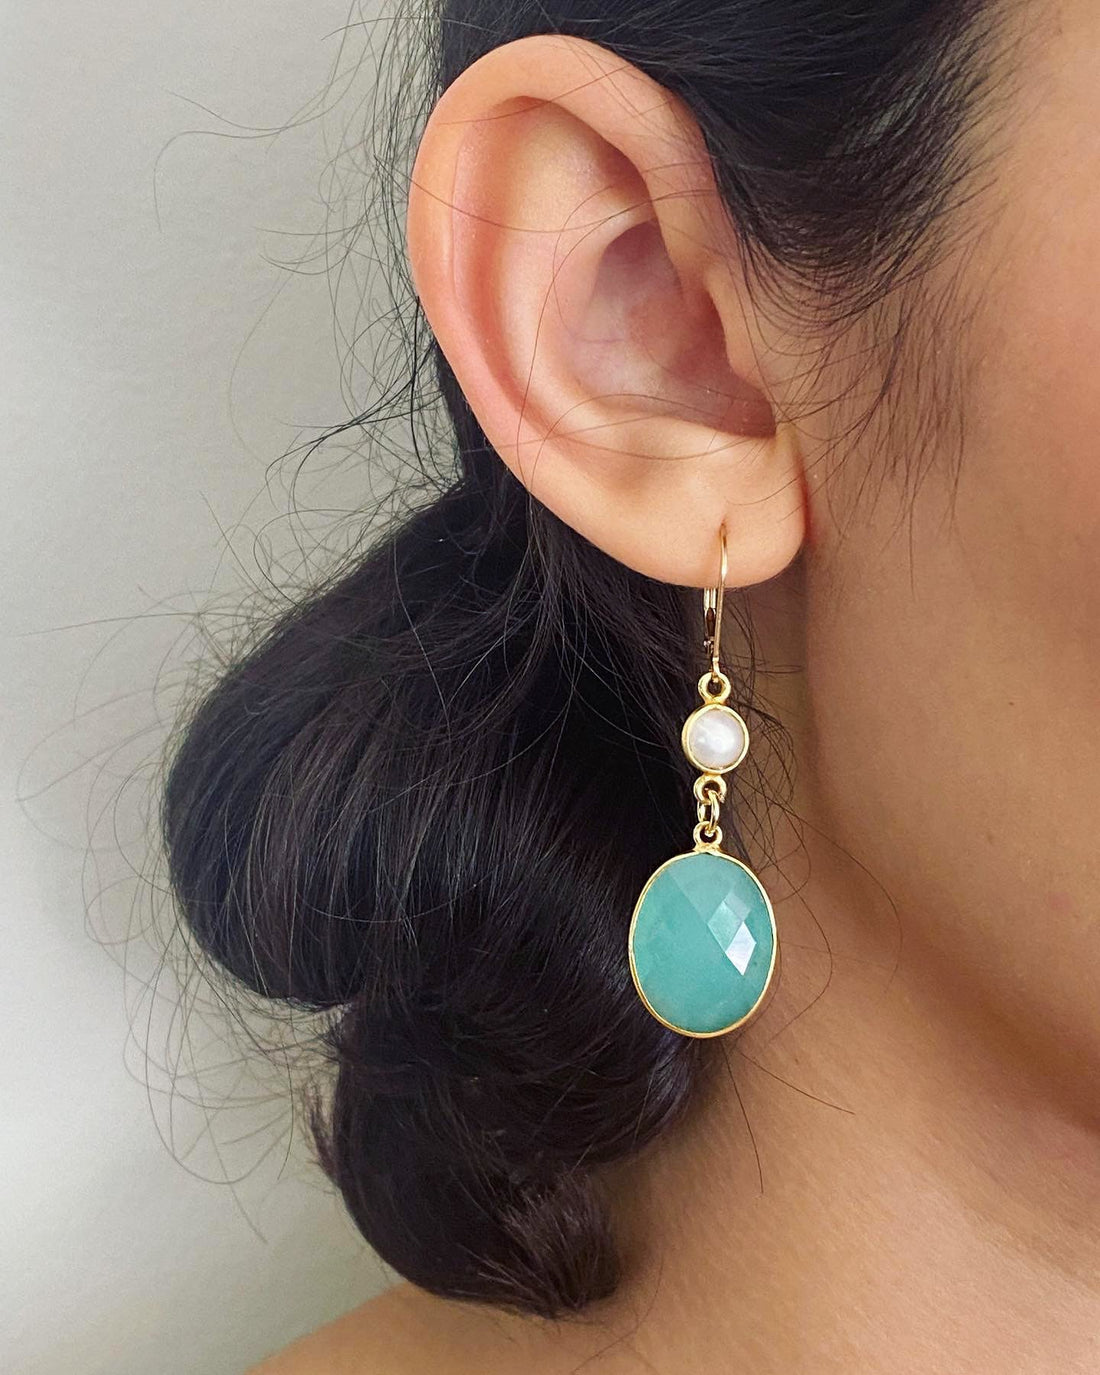 Chrysoprase Large Oval Drop Gold Earrings with Freshwater Pearls by Sage Machado - The Sage Lifestyle